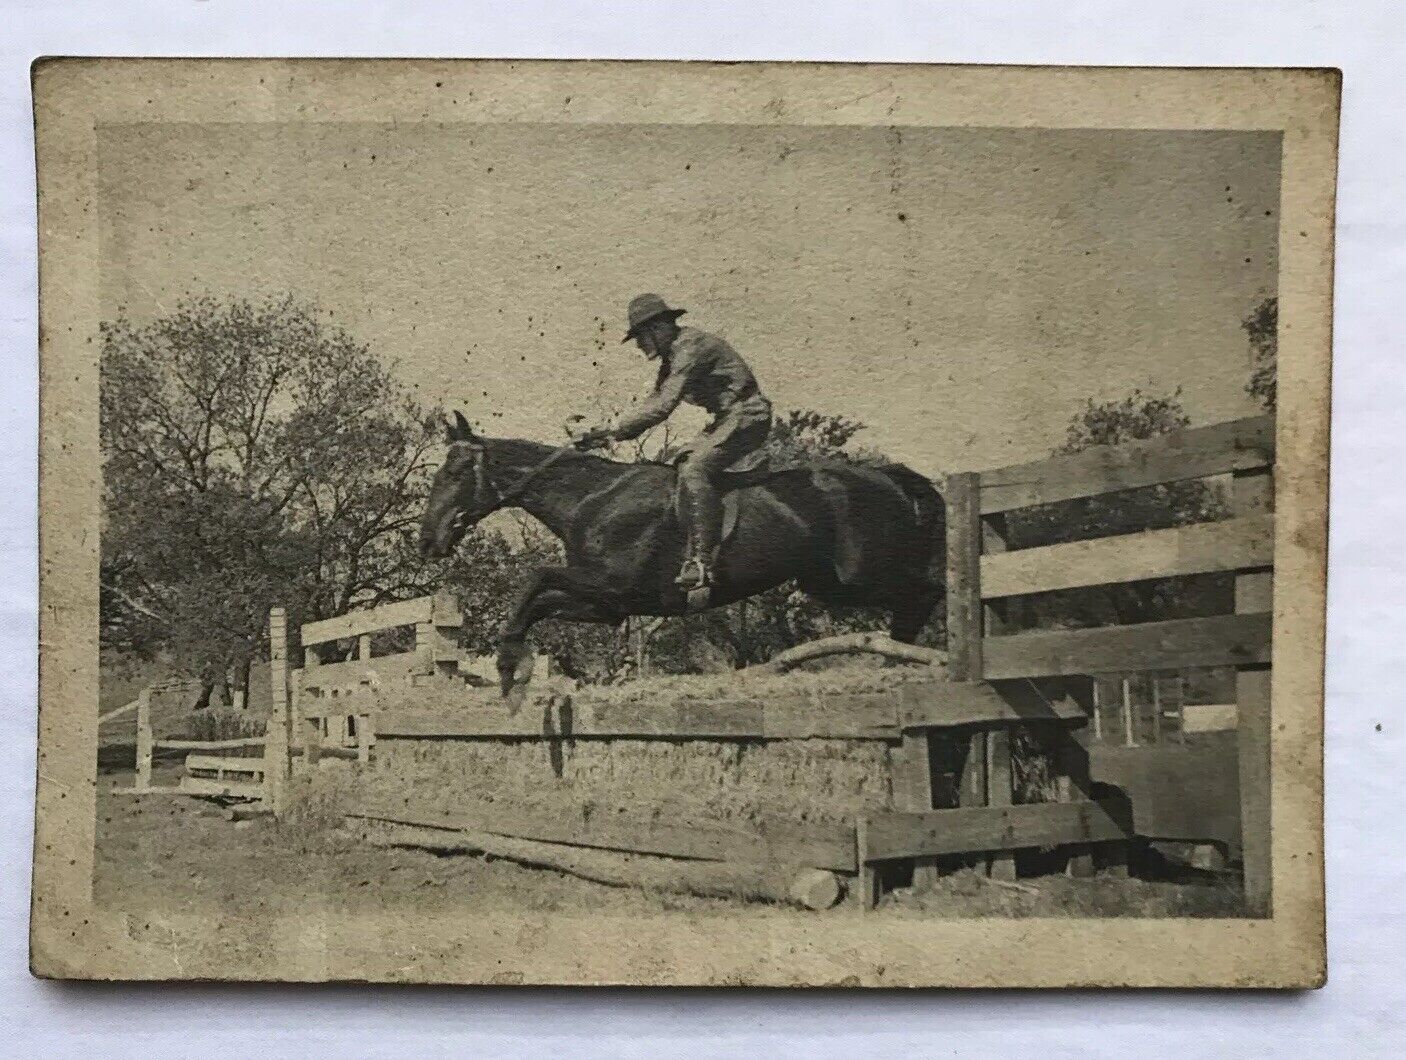 1933 EQUESTRIAN HORSE JUMP PHOTO - PRE WWII CALVARY Ft. SILL MILITARY POLICE